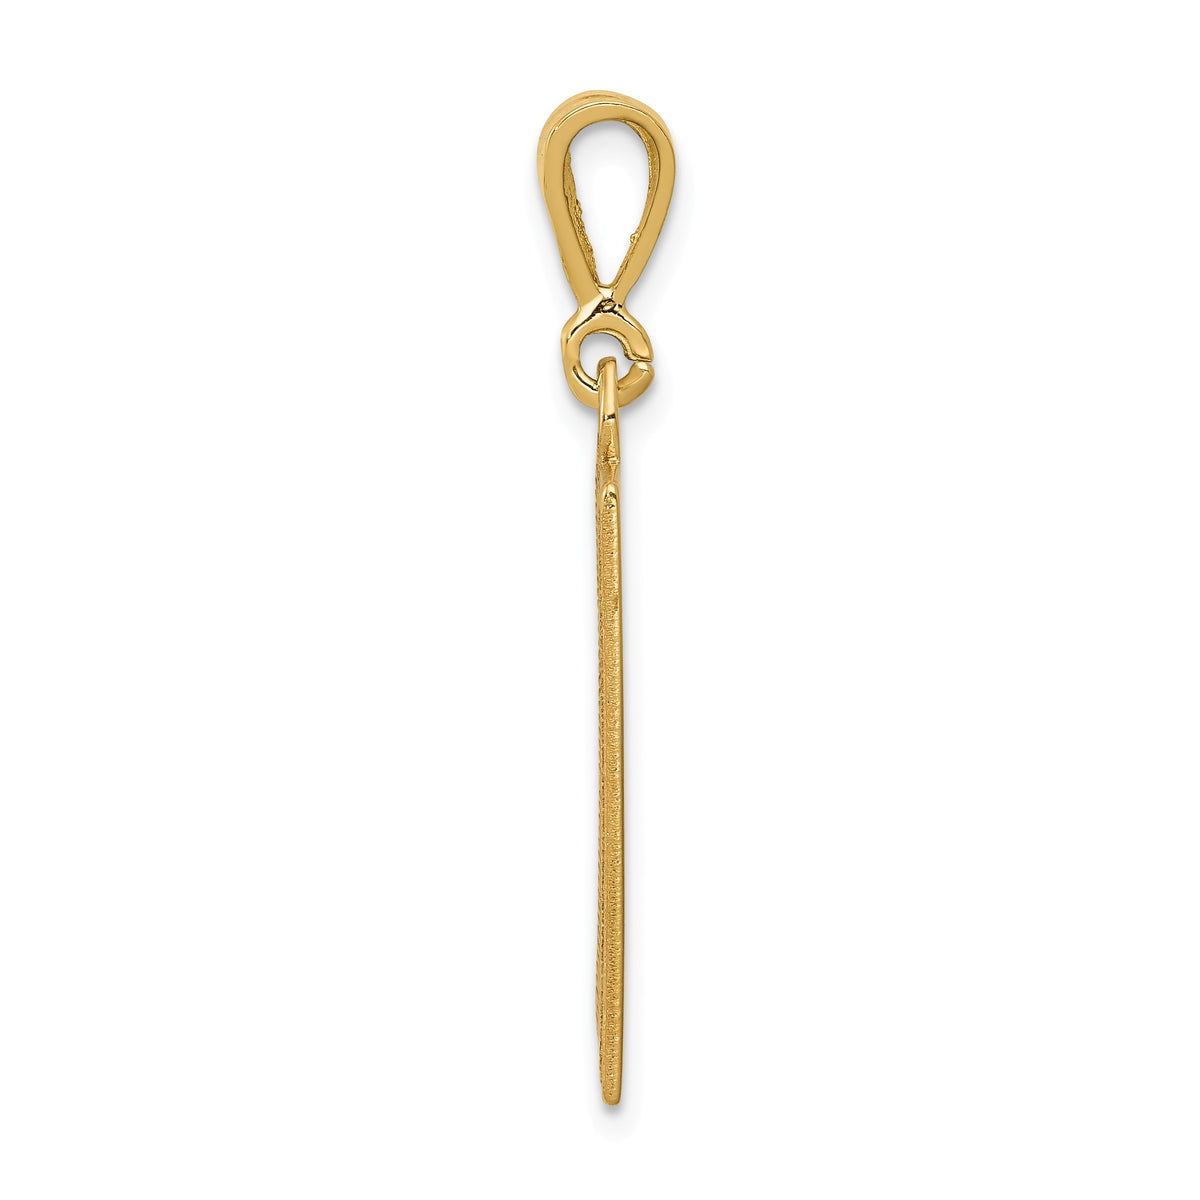 Alternate view of the 14k Yellow Gold Caduceus Rectangular Pendant by The Black Bow Jewelry Co.